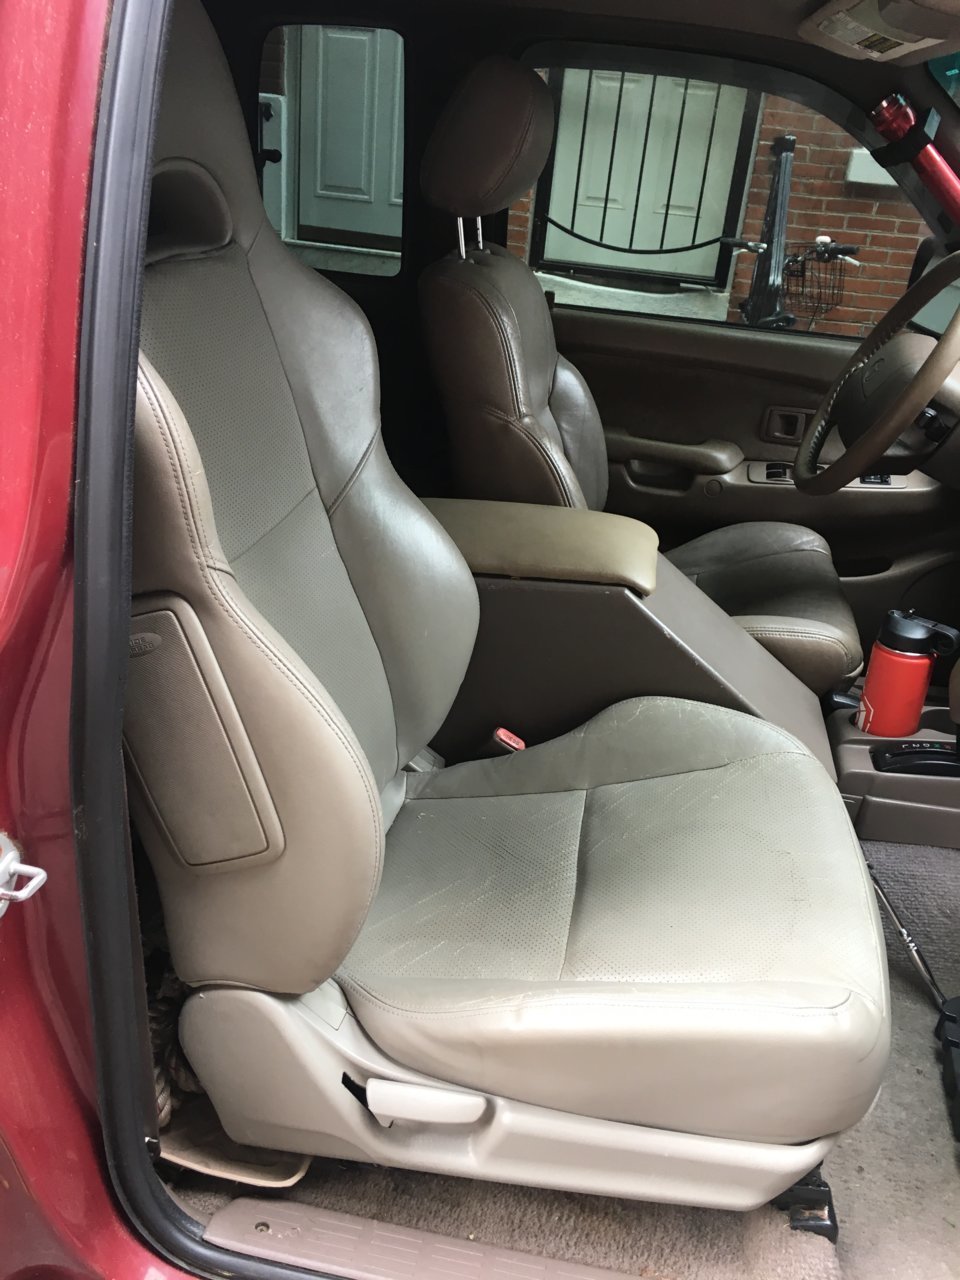 Sold Tan Leather Rsx Seats Tacoma World